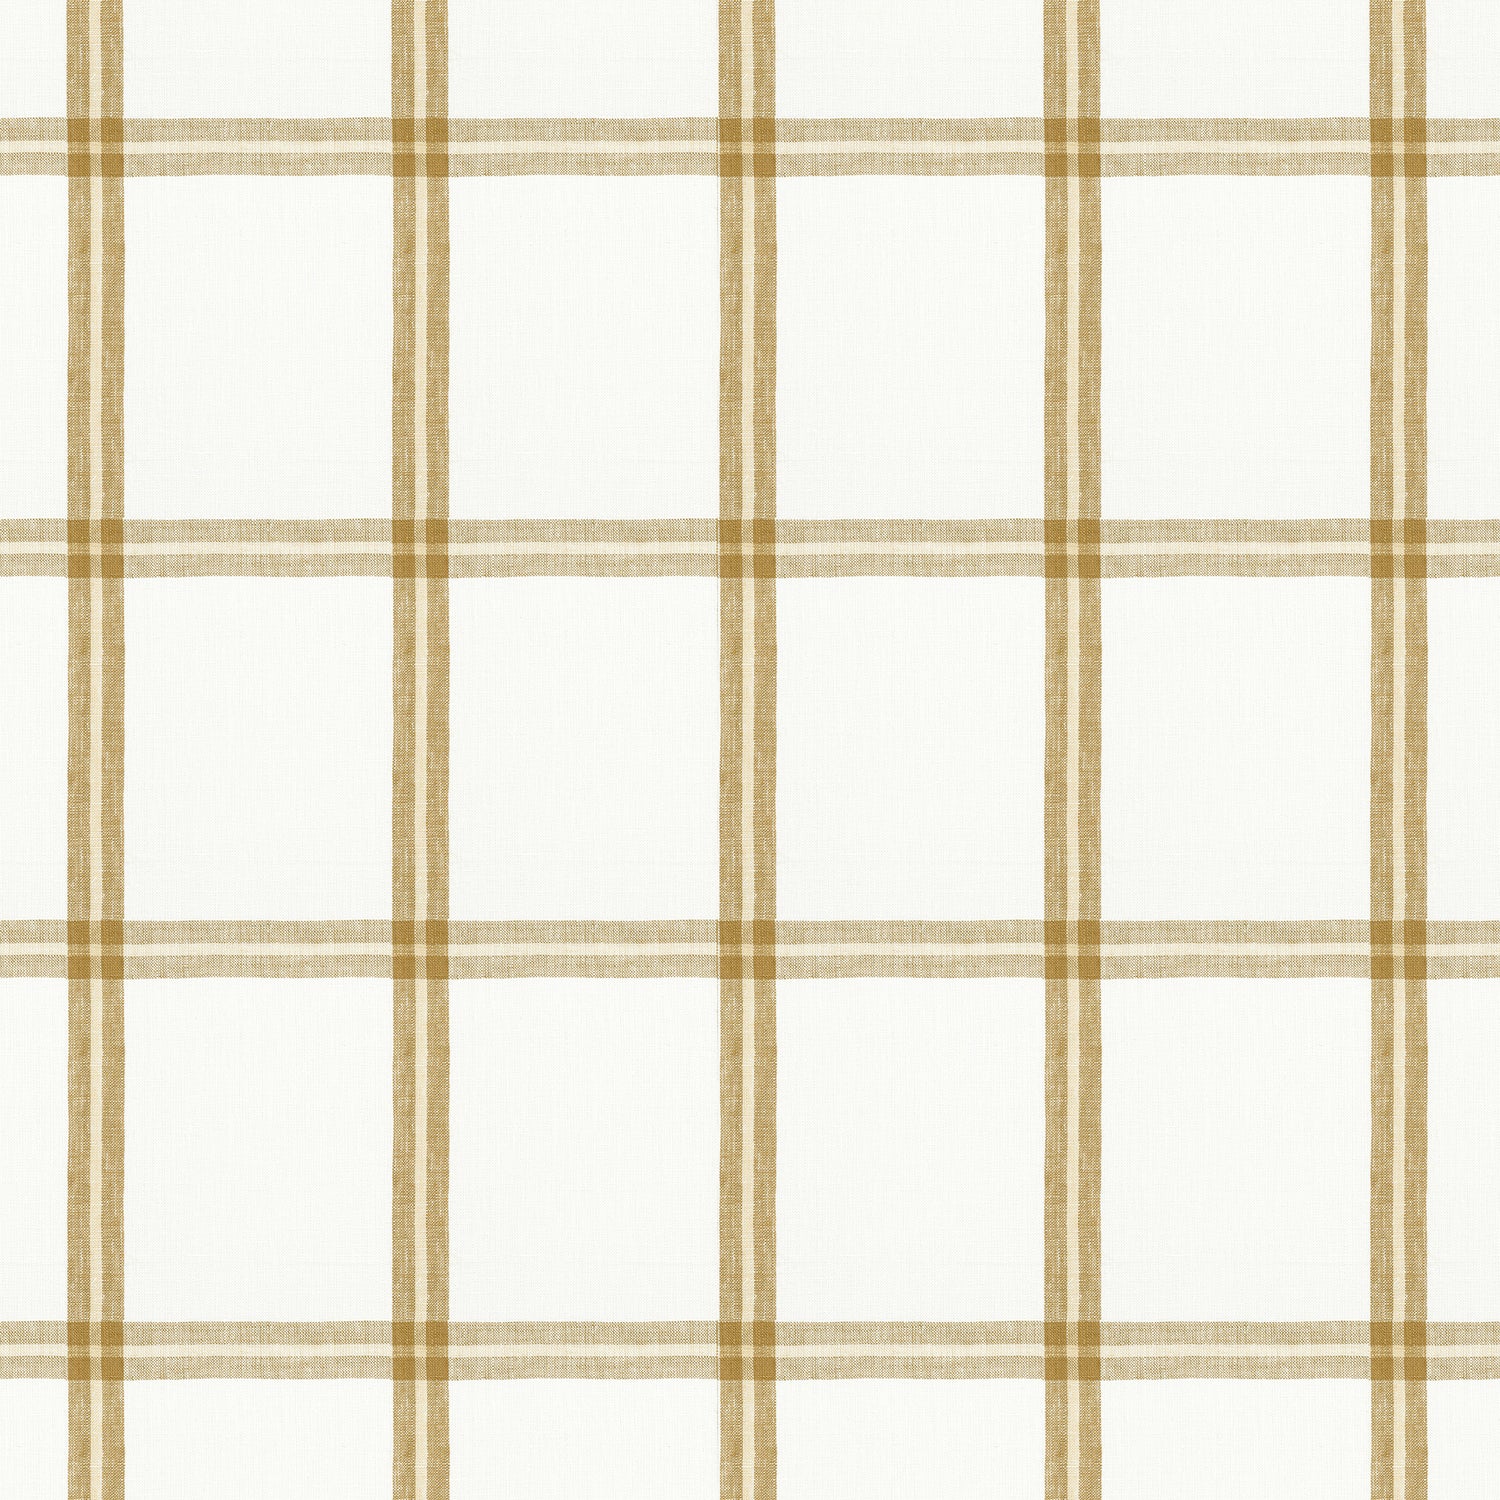 Huntington Plaid fabric in camel color - pattern number W781333 - by Thibaut in the Montecito collection